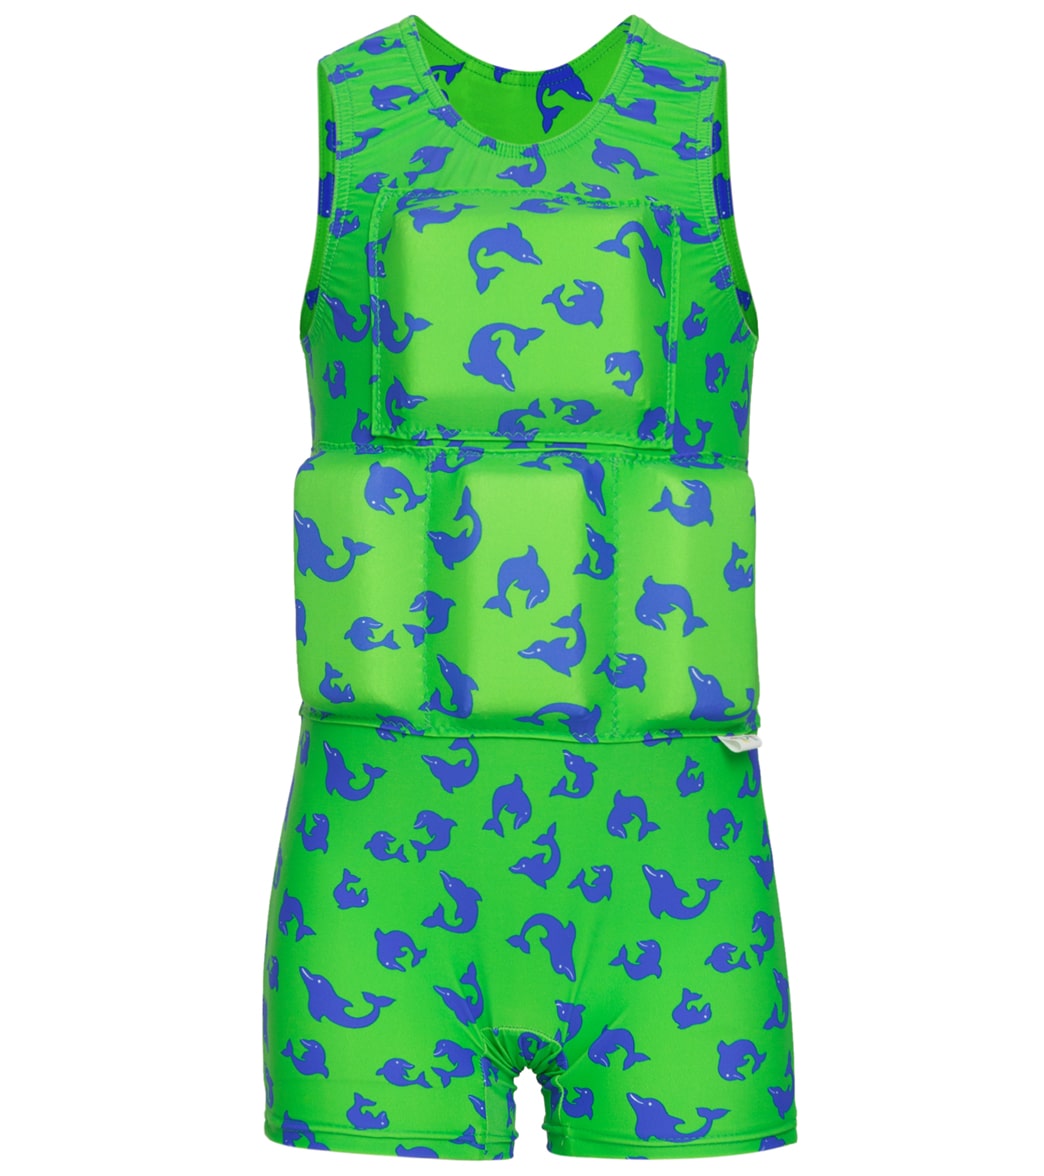 My Pool Pal Boy's Bright Green And Blue Dolfin Flotation Swimsuit - Green/Blue Dolphin Print Large 50-70 Lbs - Swimoutlet.com